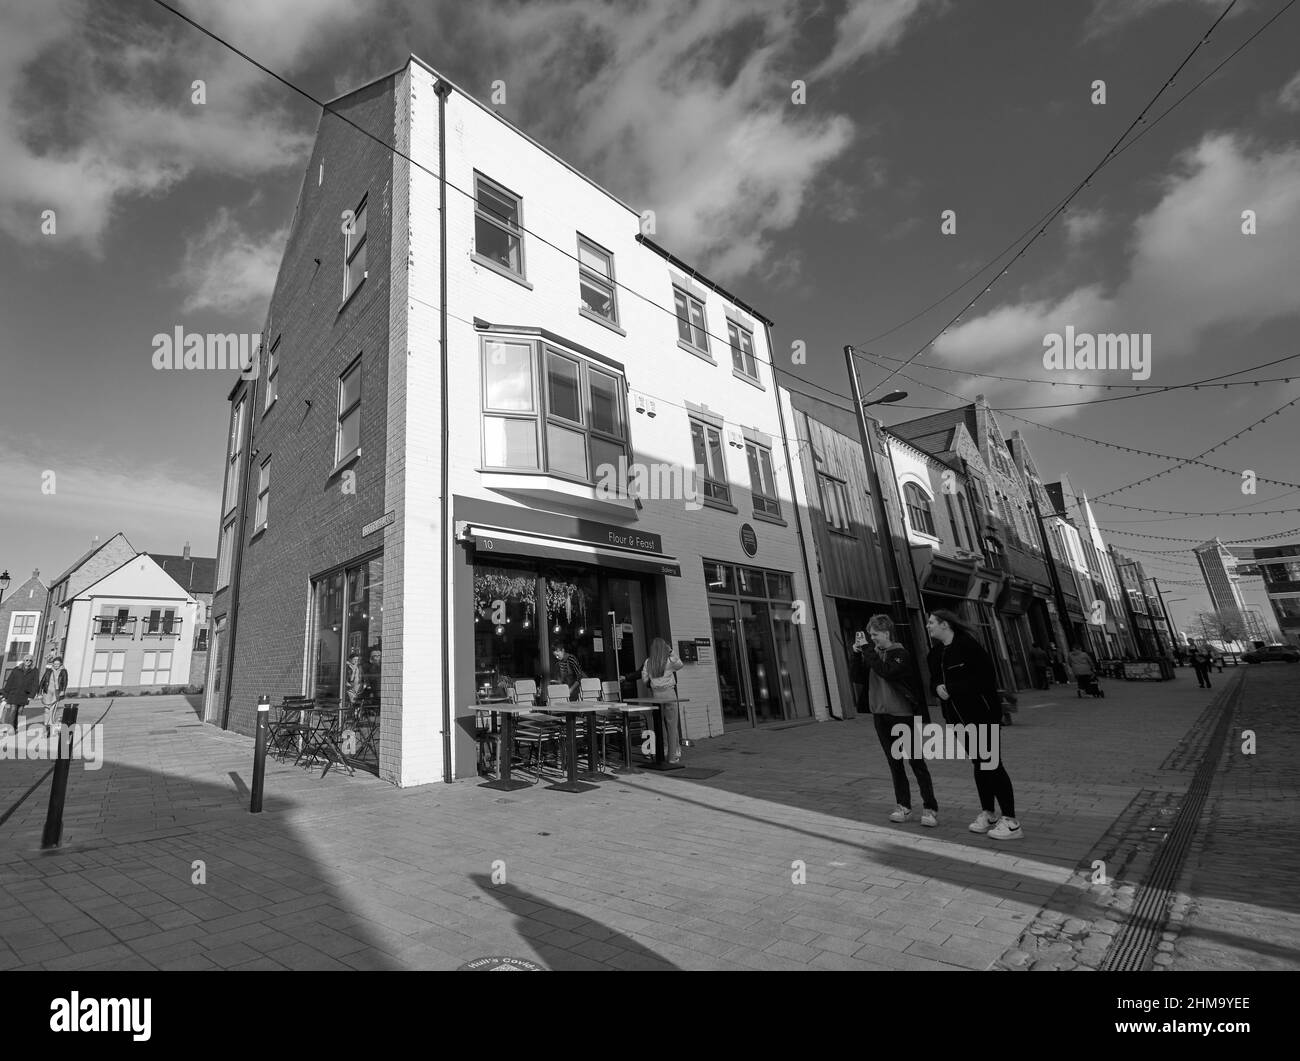 Small city restaurant with outdoor seating Stock Photo